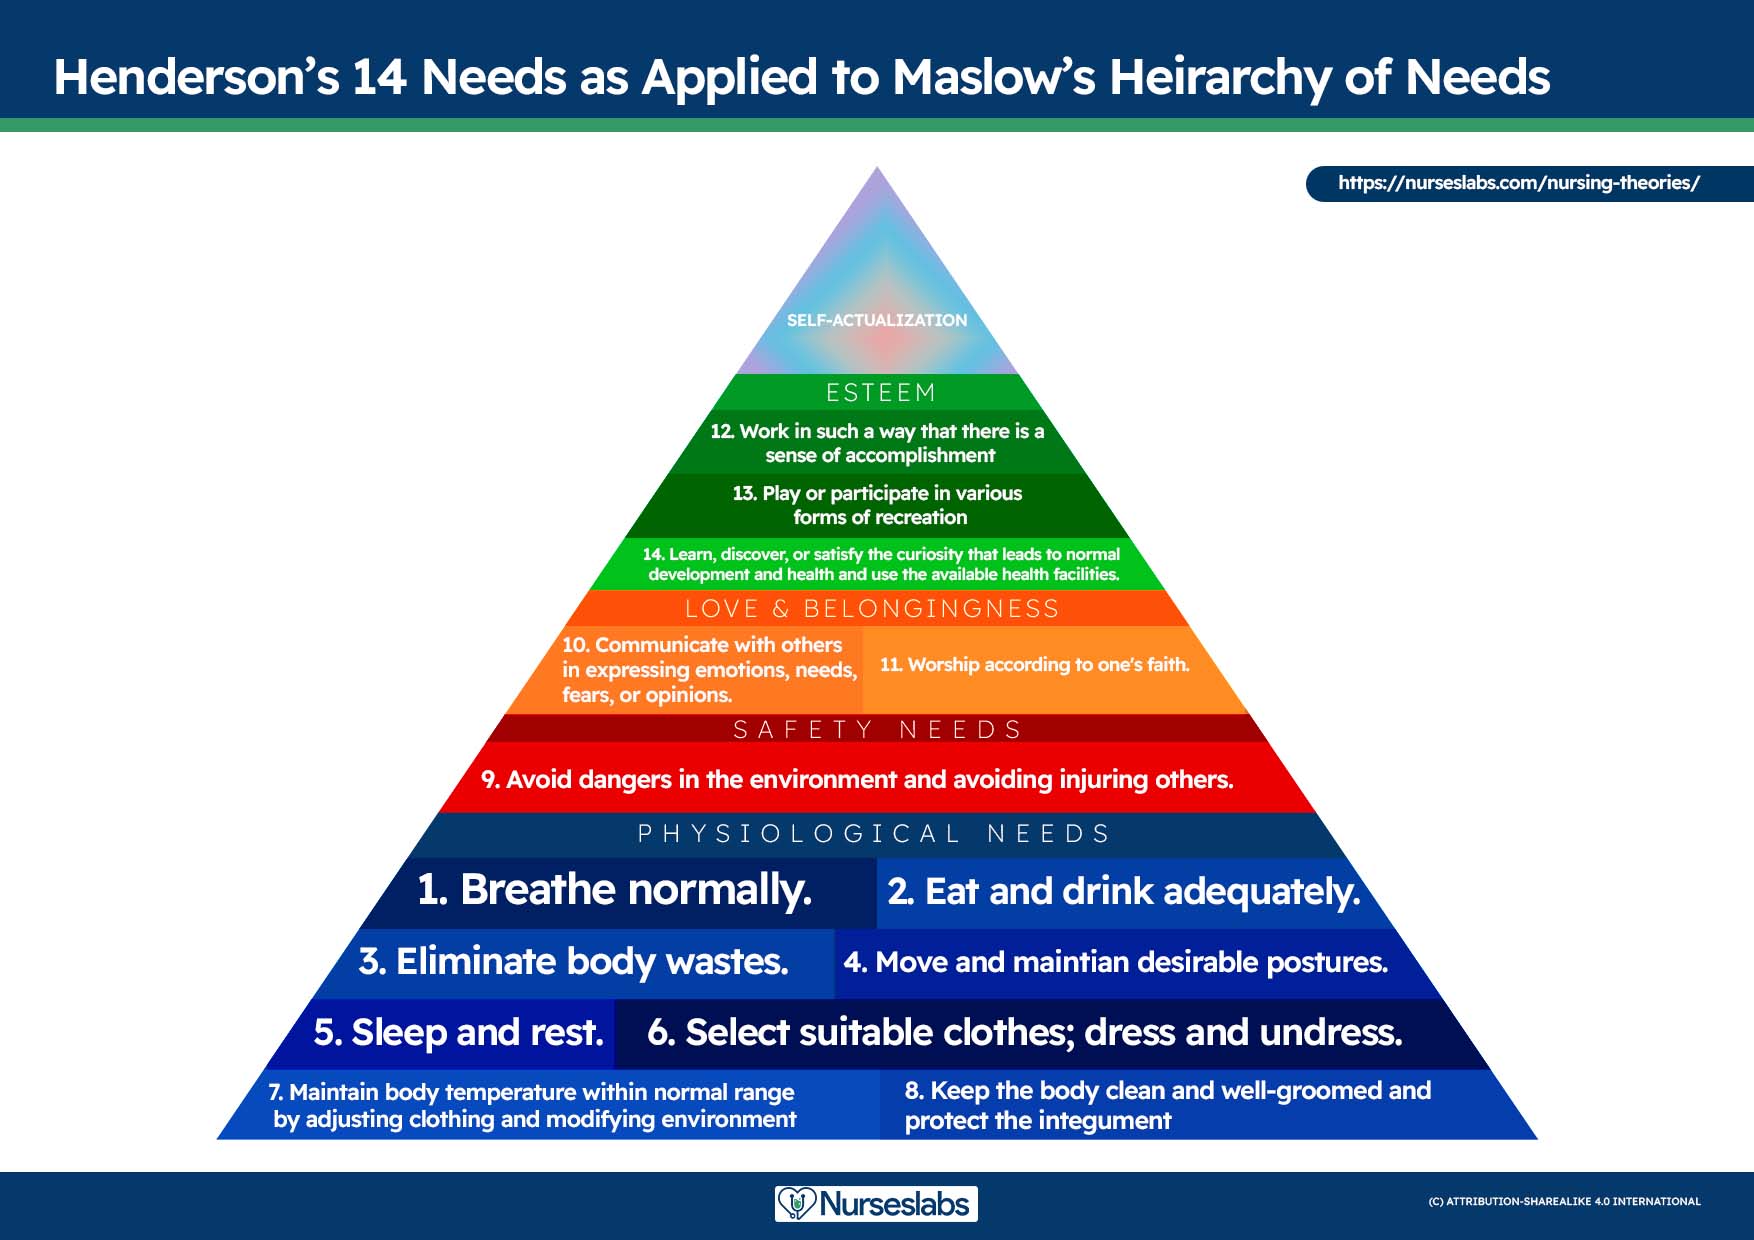 Henderson's 14 Components as Applied to Maslow's Hierarchy of Needs